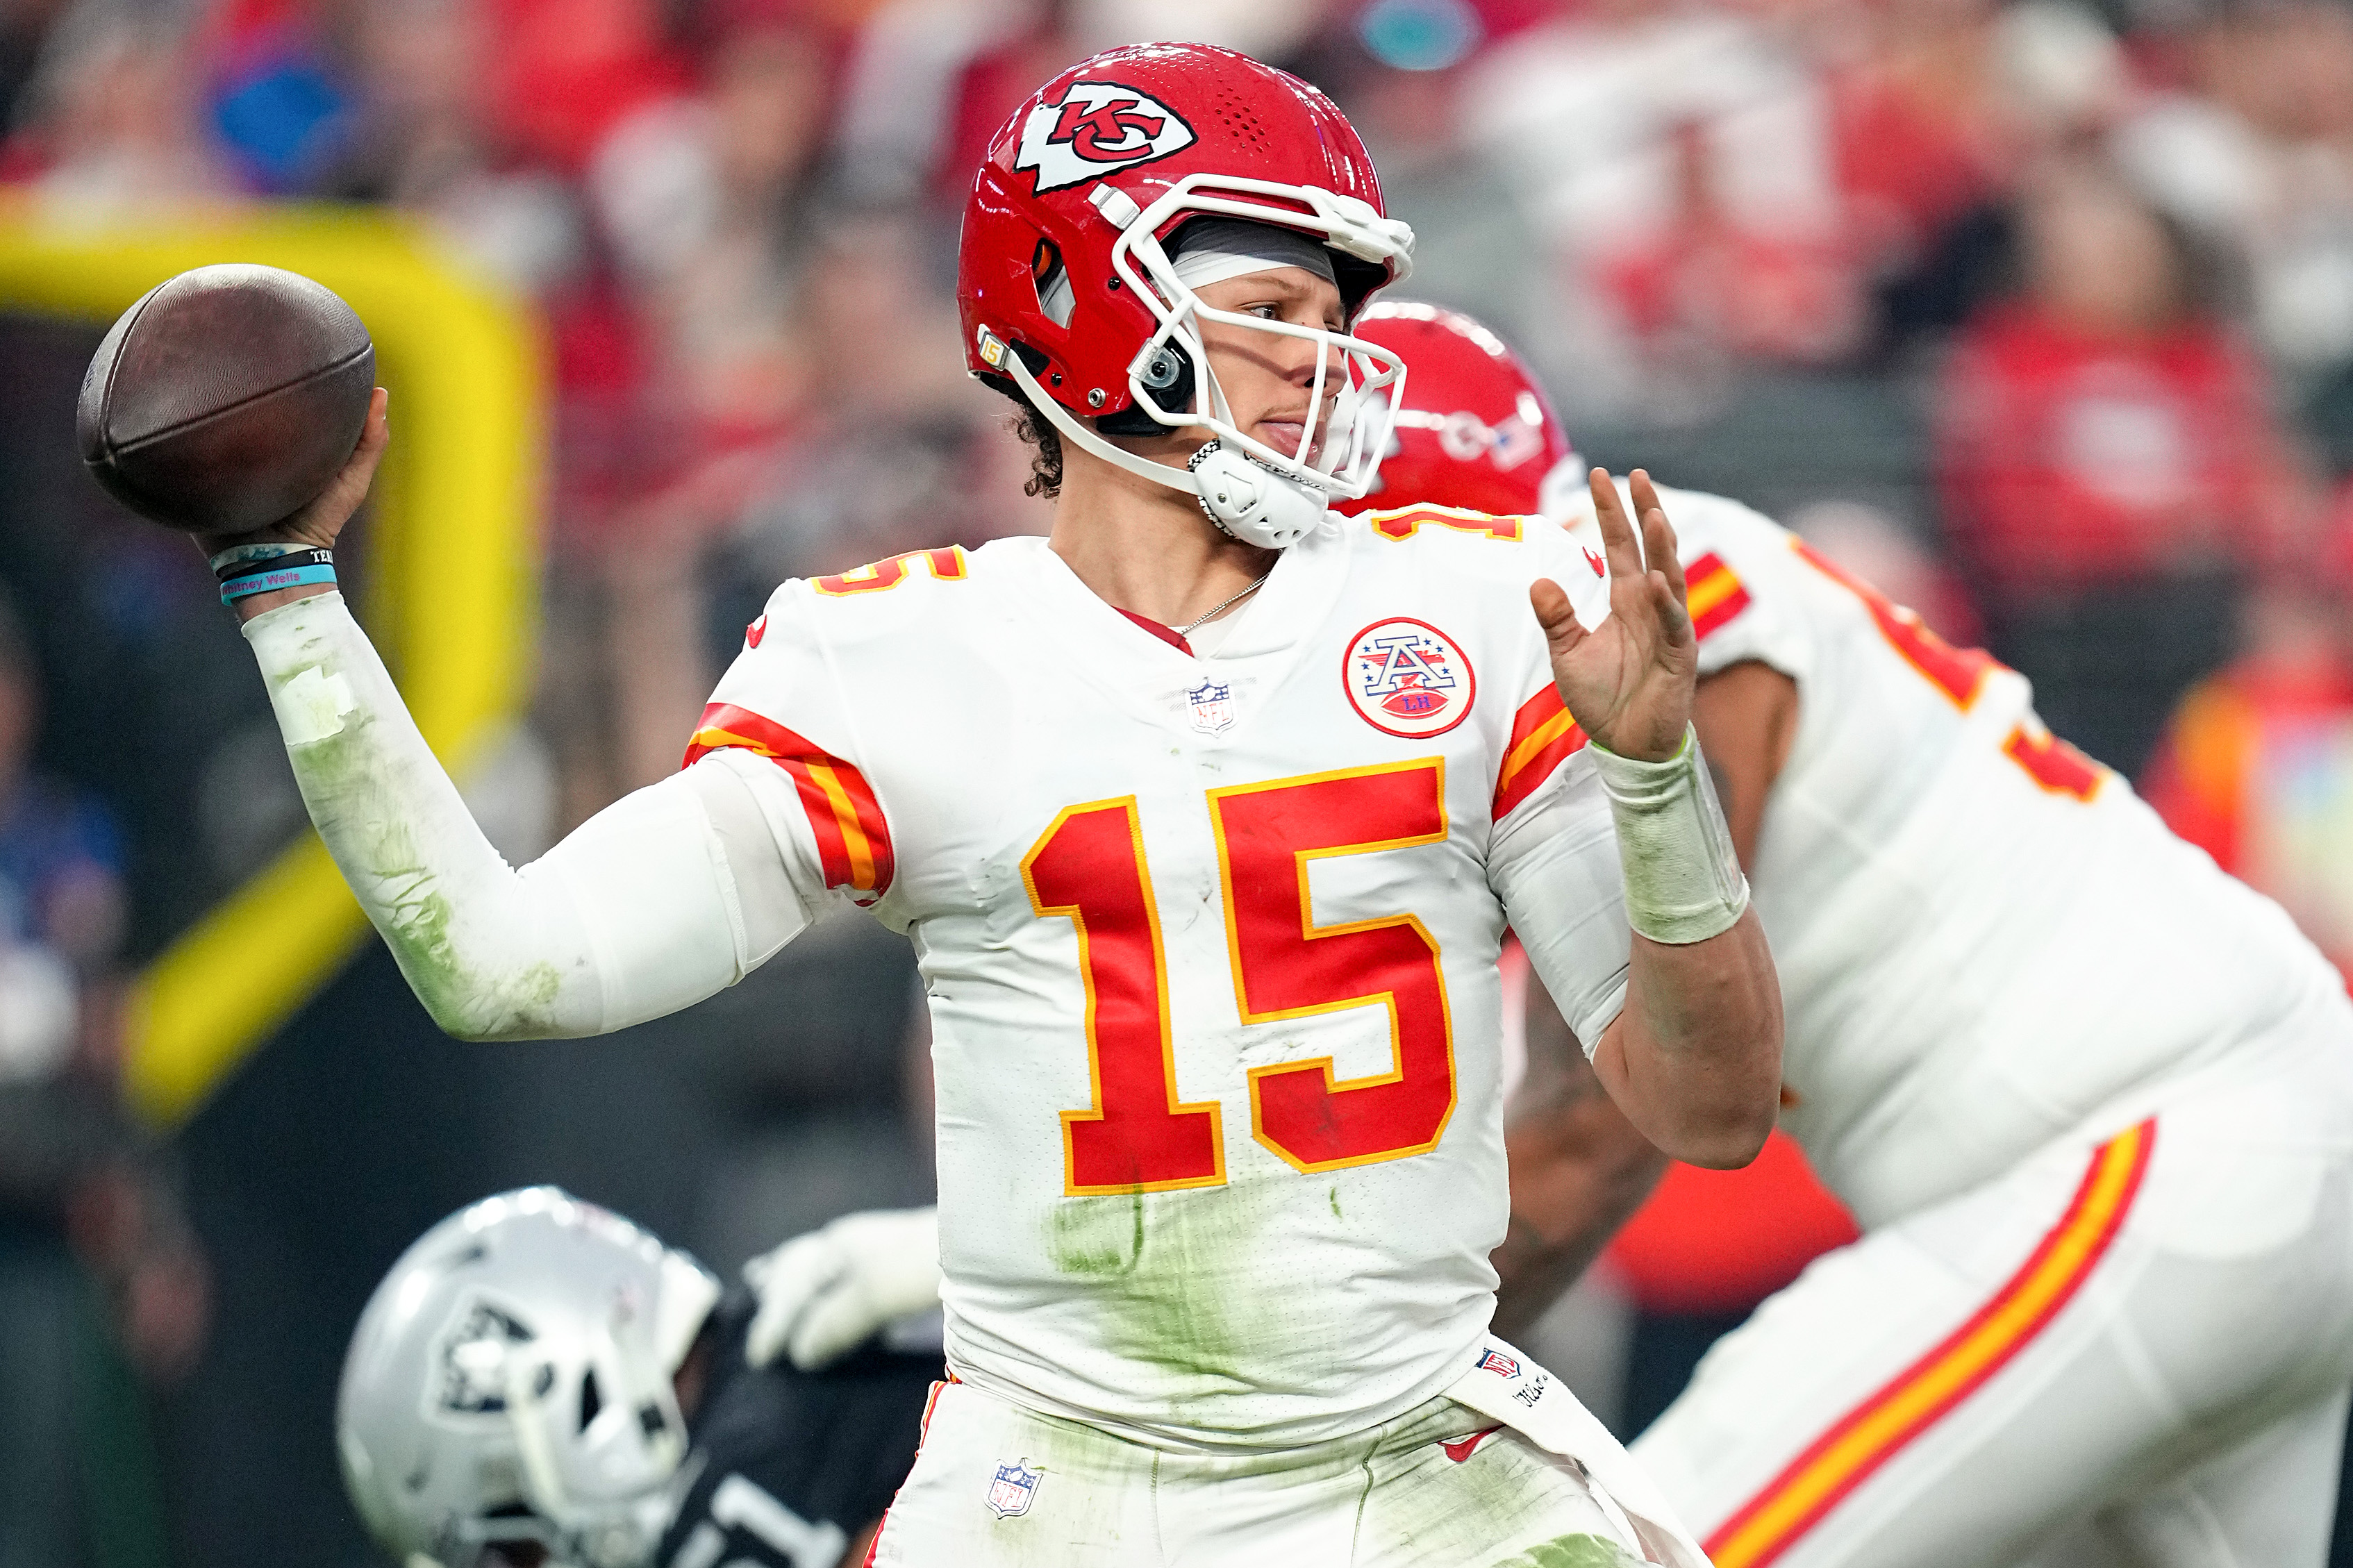 Patrick Mahomes #15 of the Kansas City Chiefs throws a pass against the Las Vegas Raiders during the second half of the game at Allegiant Stadium on January 07, 2023 in Las Vegas, Nevada.